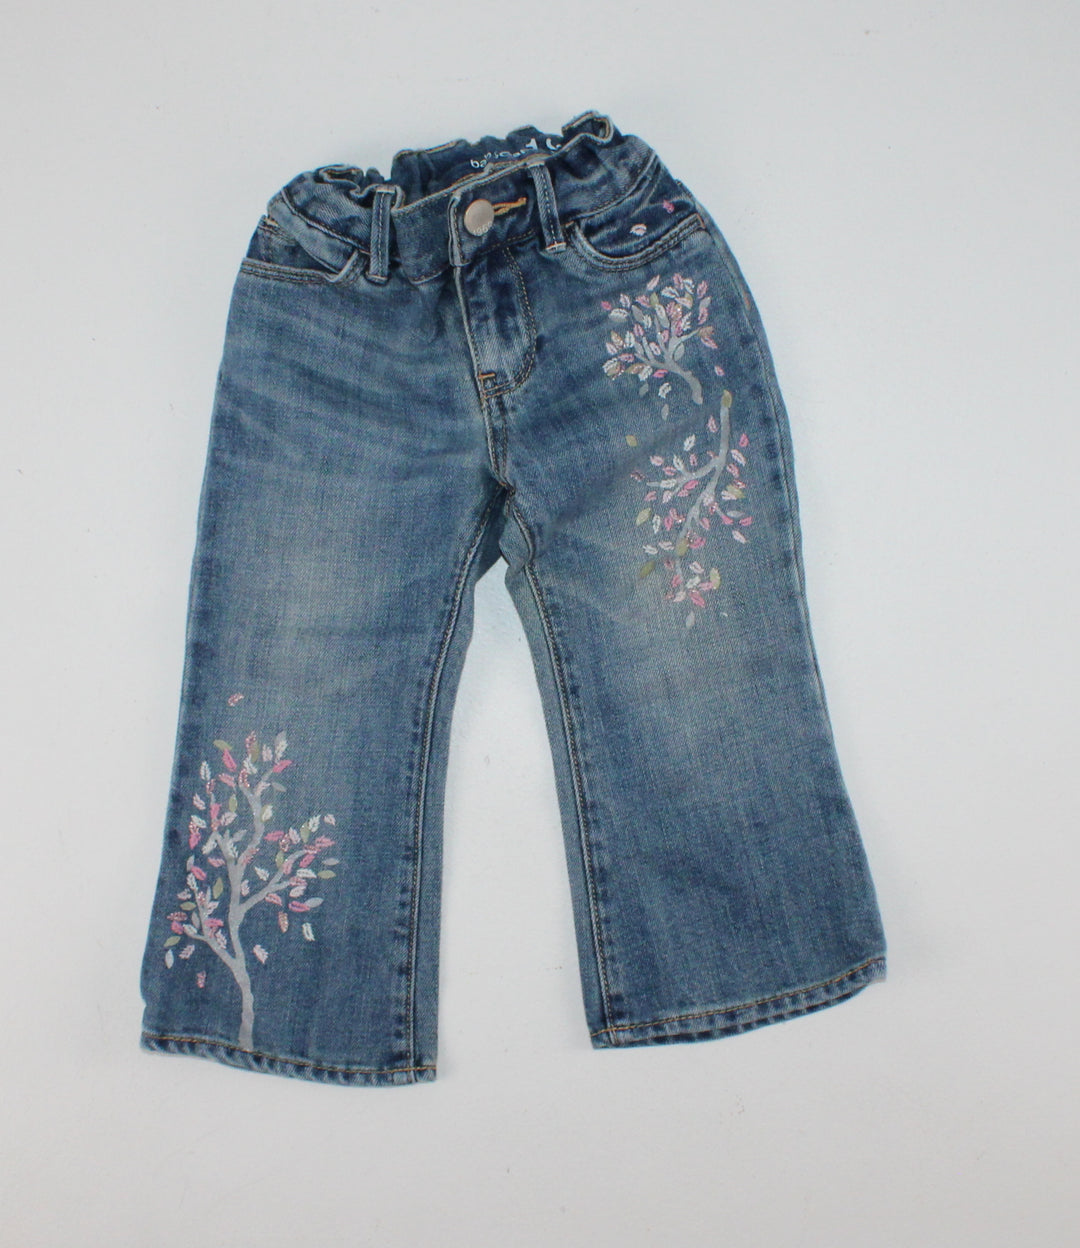 GAP EMBROIDERED JEANS 18-24M VGUC